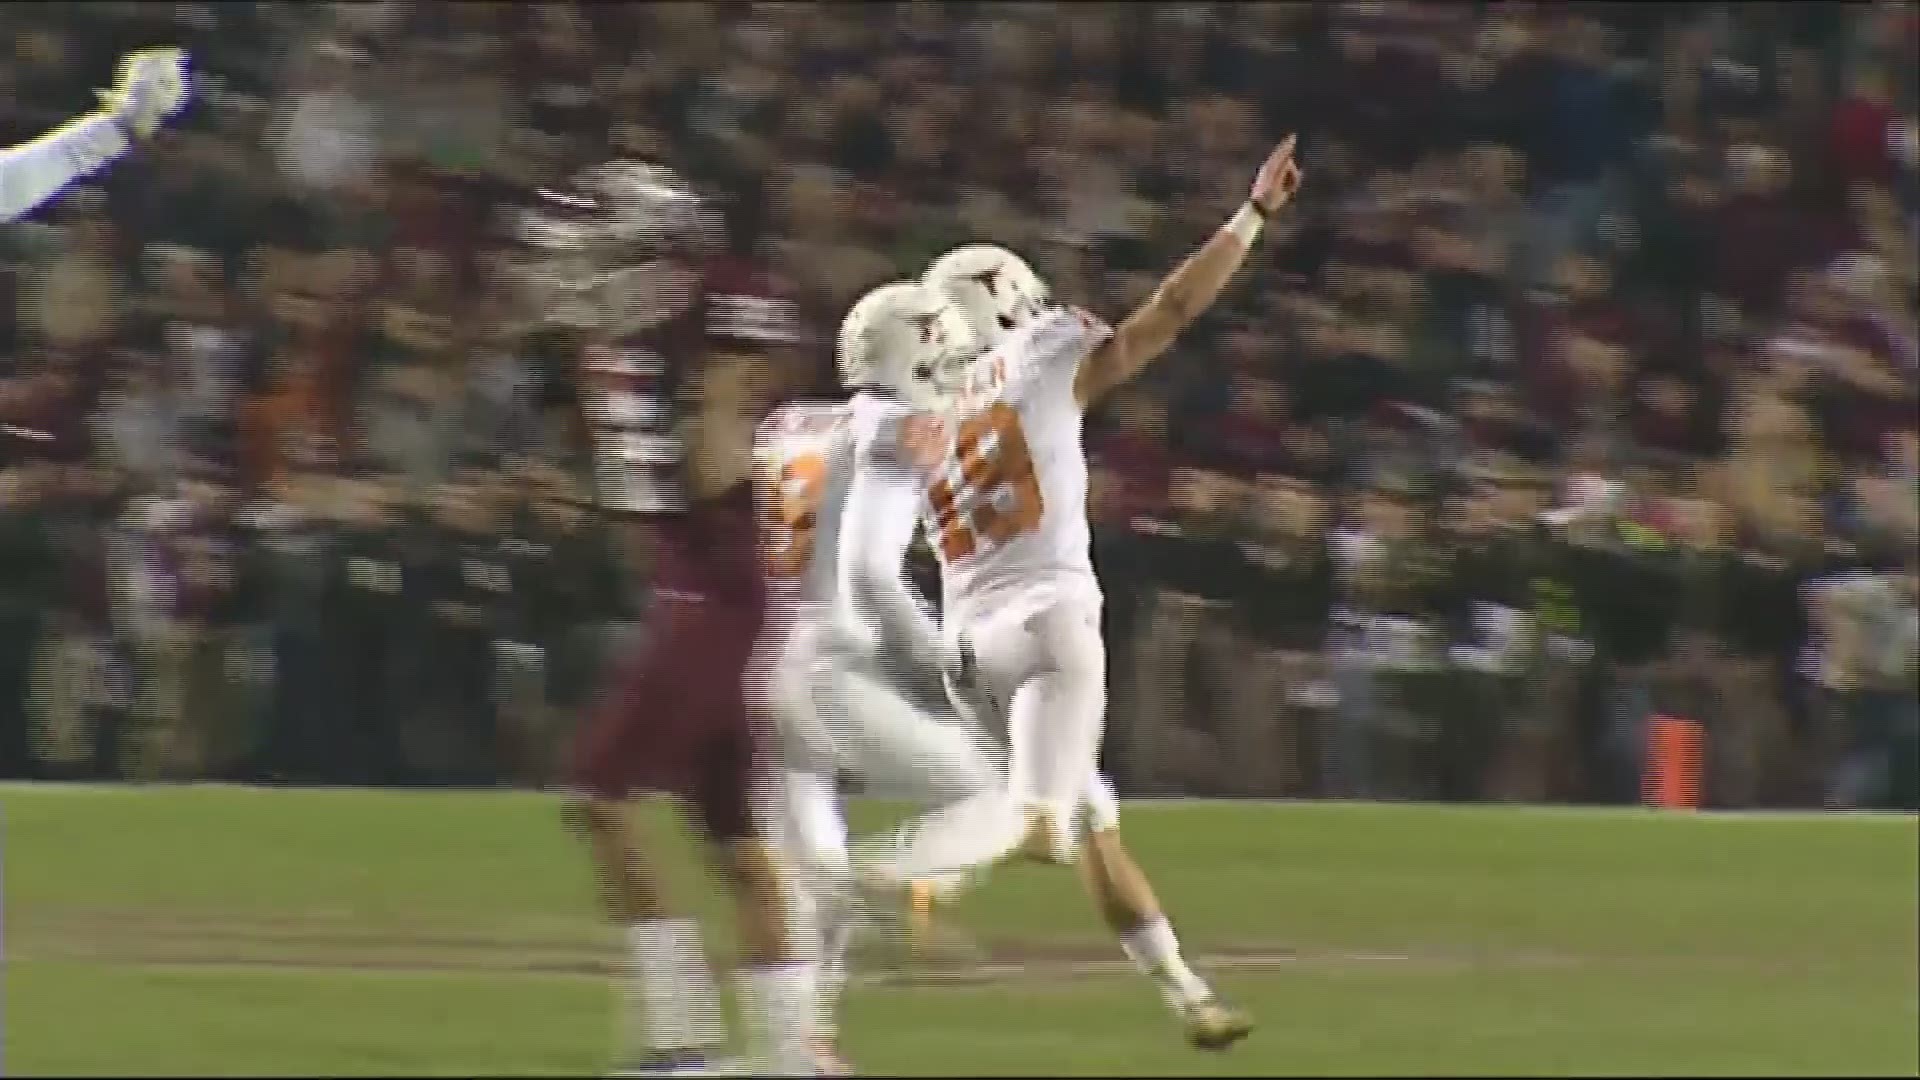 The Texas Longhorns and Texas A&M Aggies faced off for 117 years before ending their football rivalry in 2011.